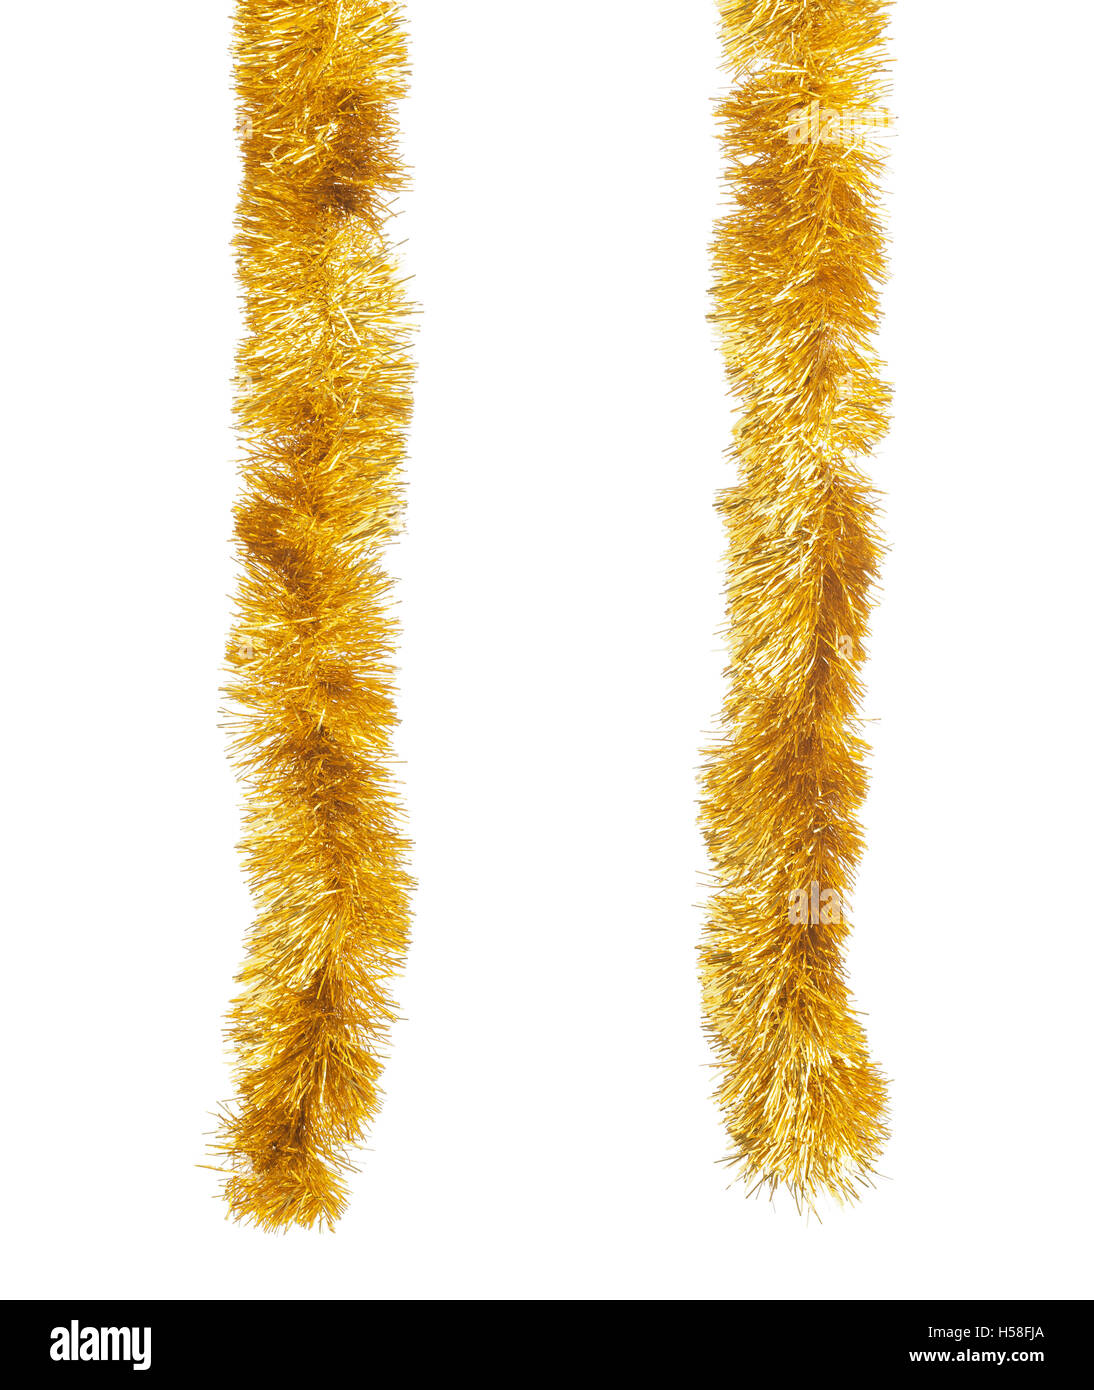 Two golden Christmas tinsels hanging in vertical position. Isolated on white background. Stock Photo